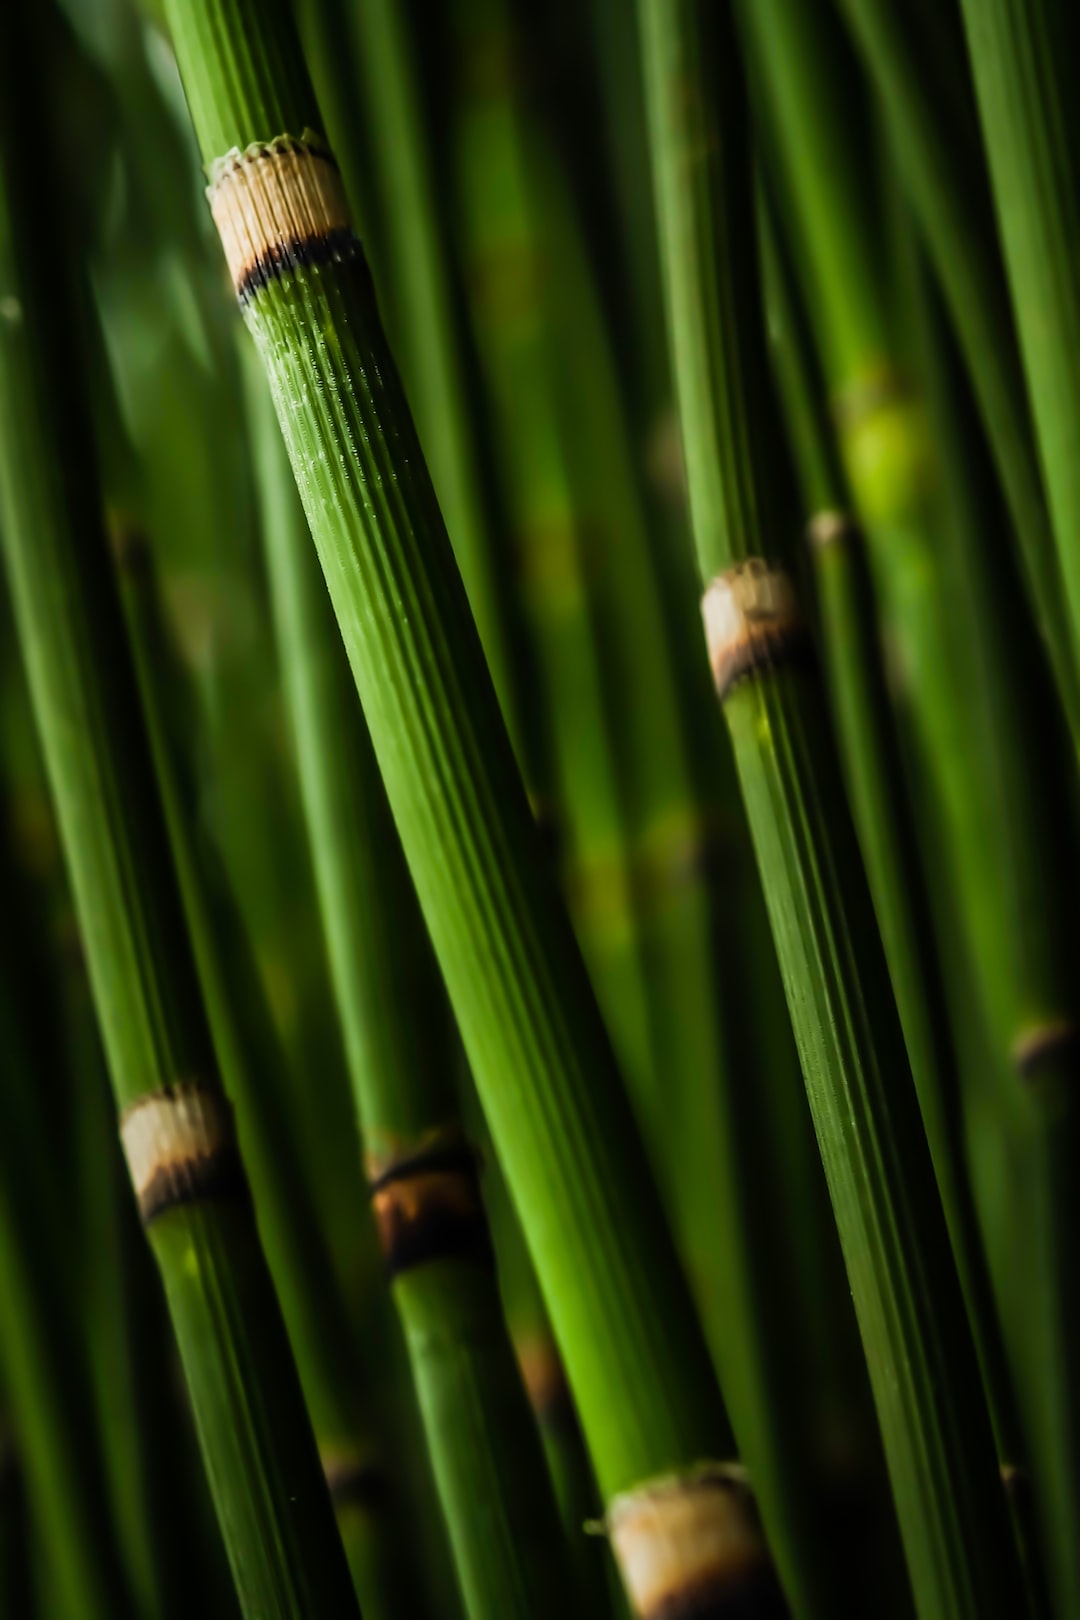 Thick bamboo stems